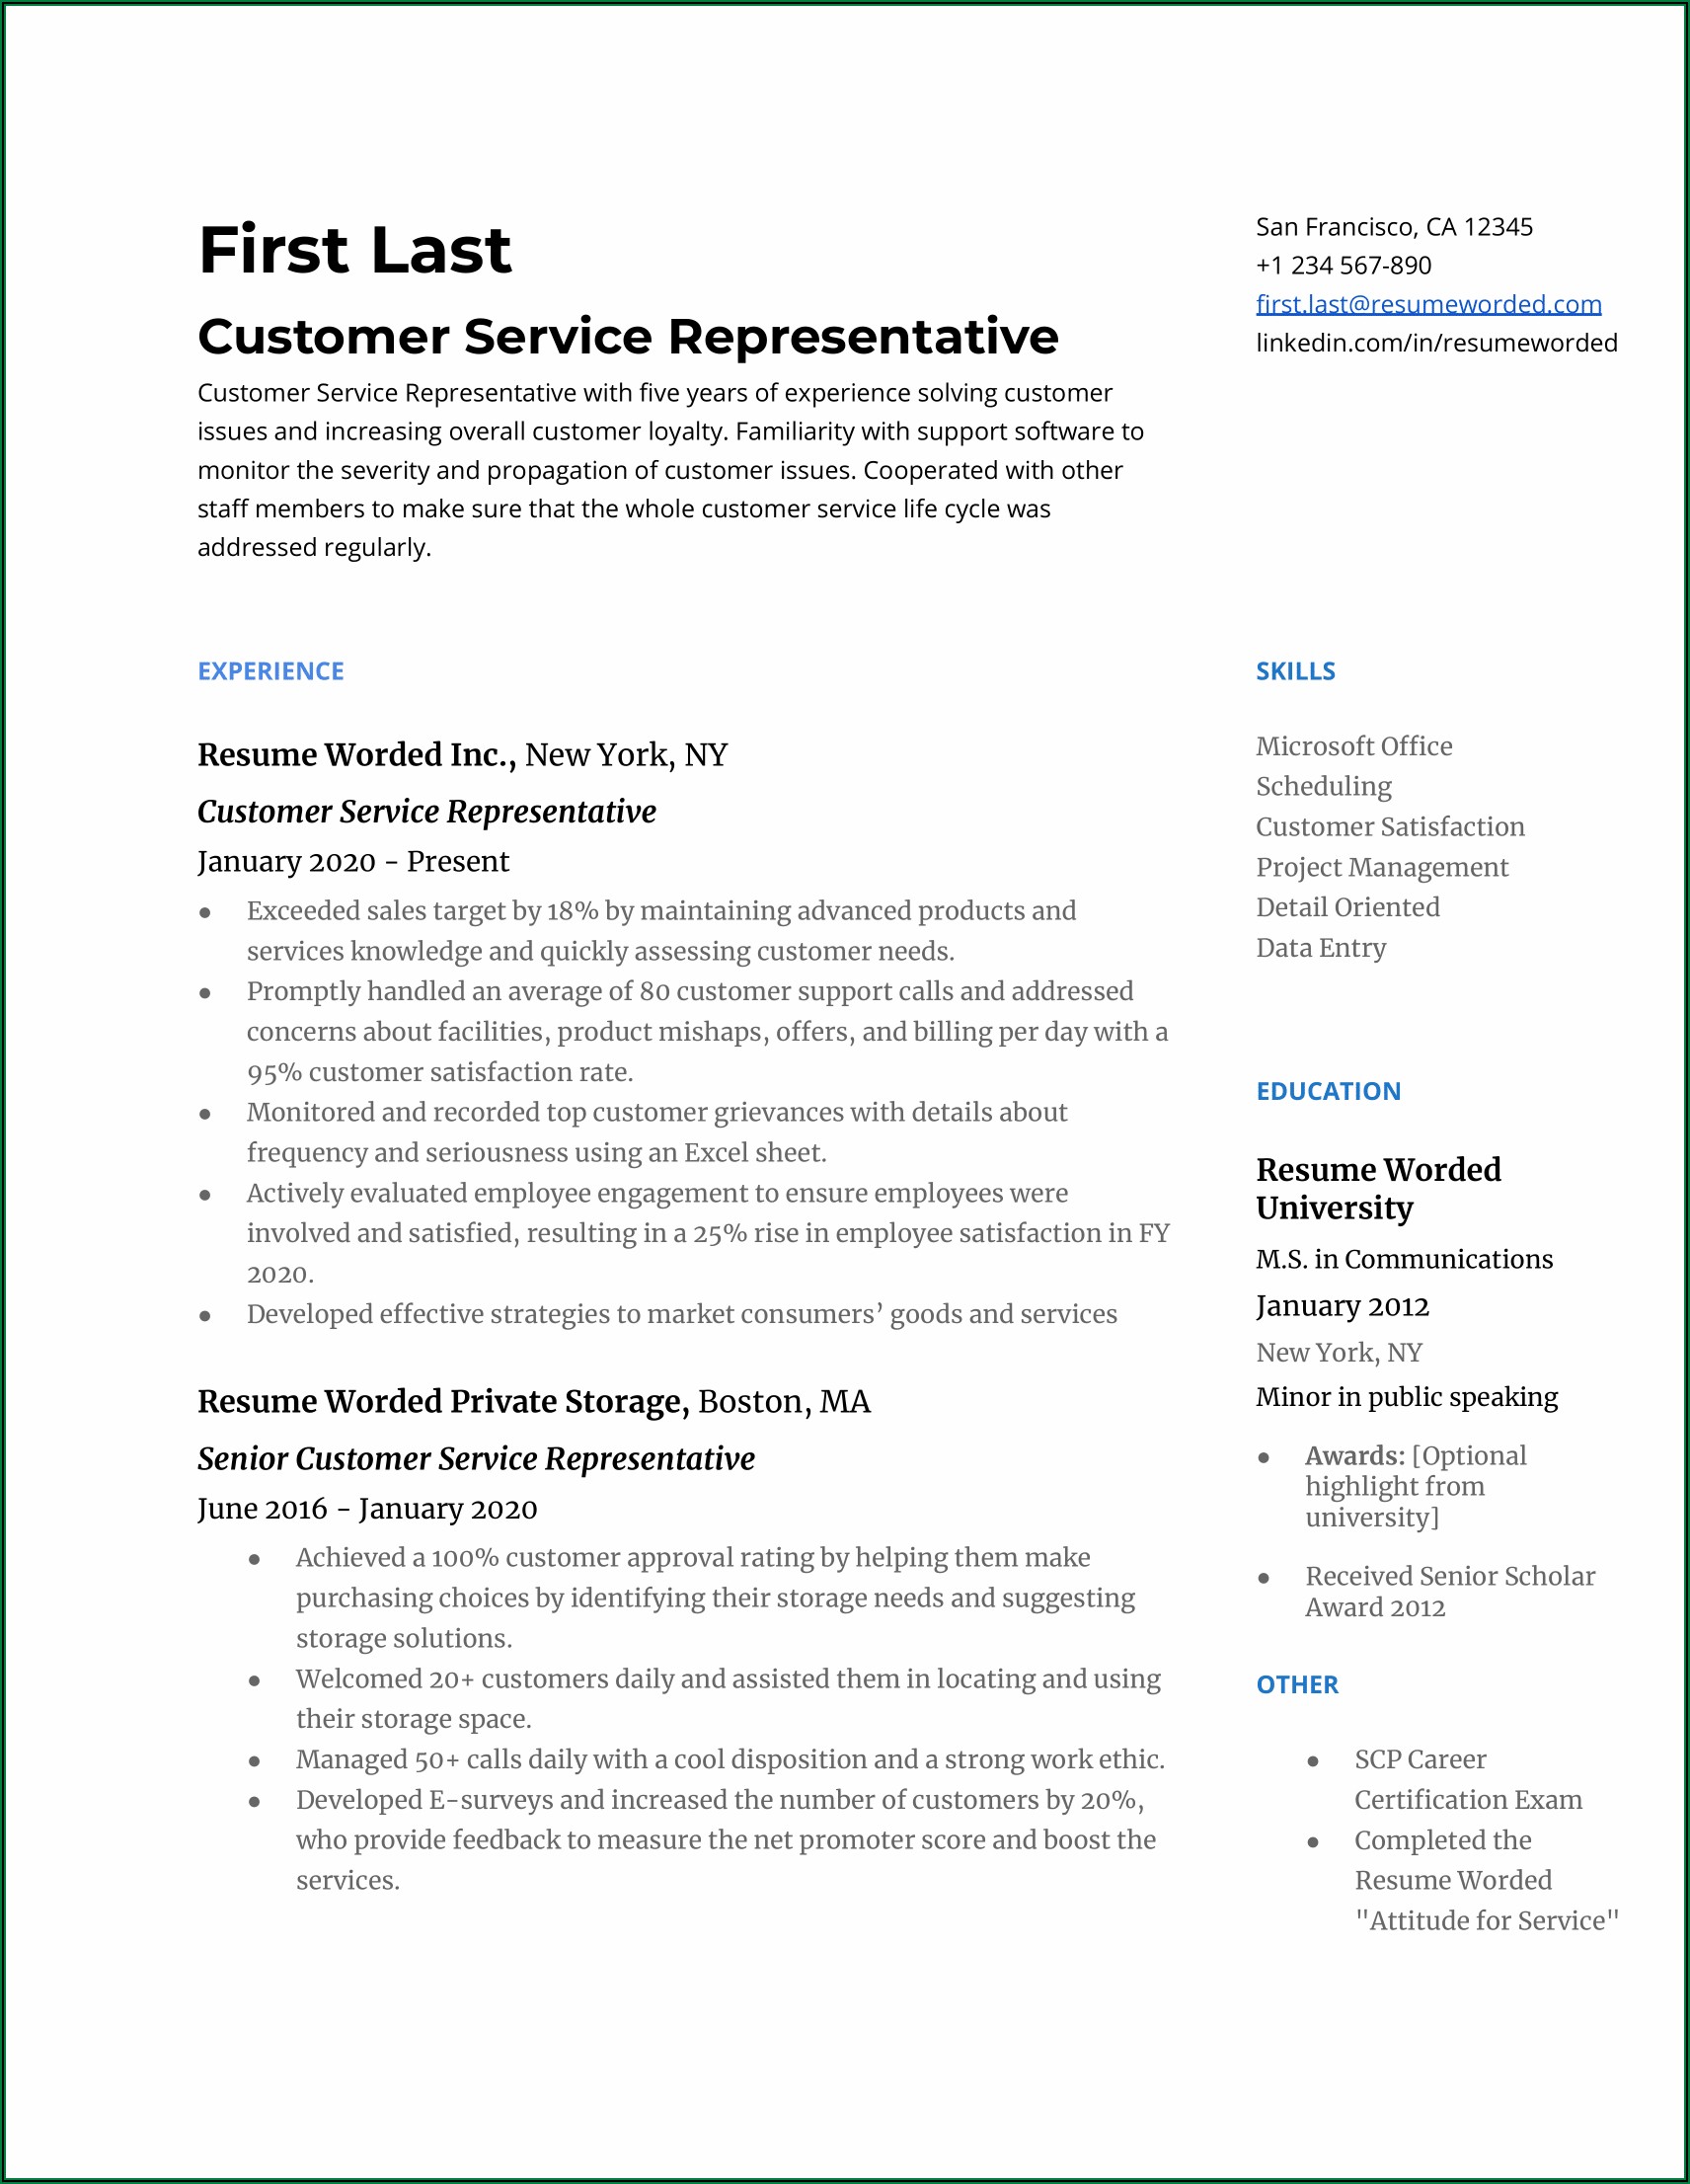 Sample Resume For Customer Service Representative With Experience